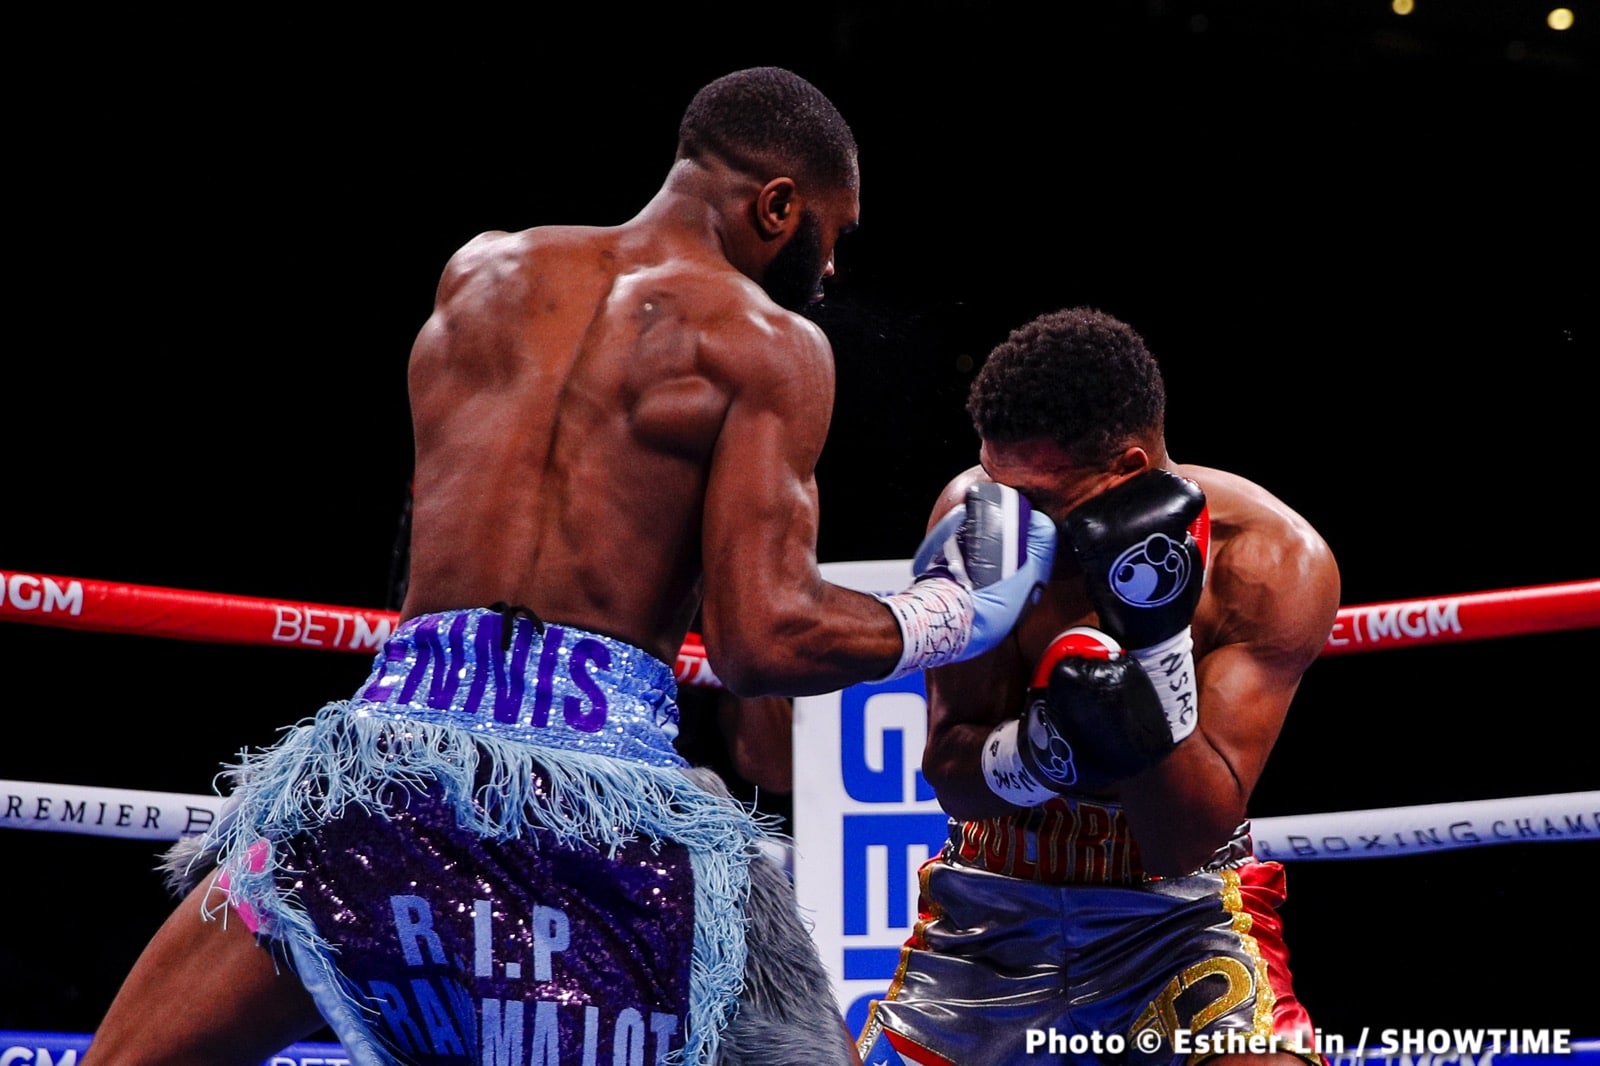 Shawn Porter says Jaron 'Boots" Ennis is "Overrated"